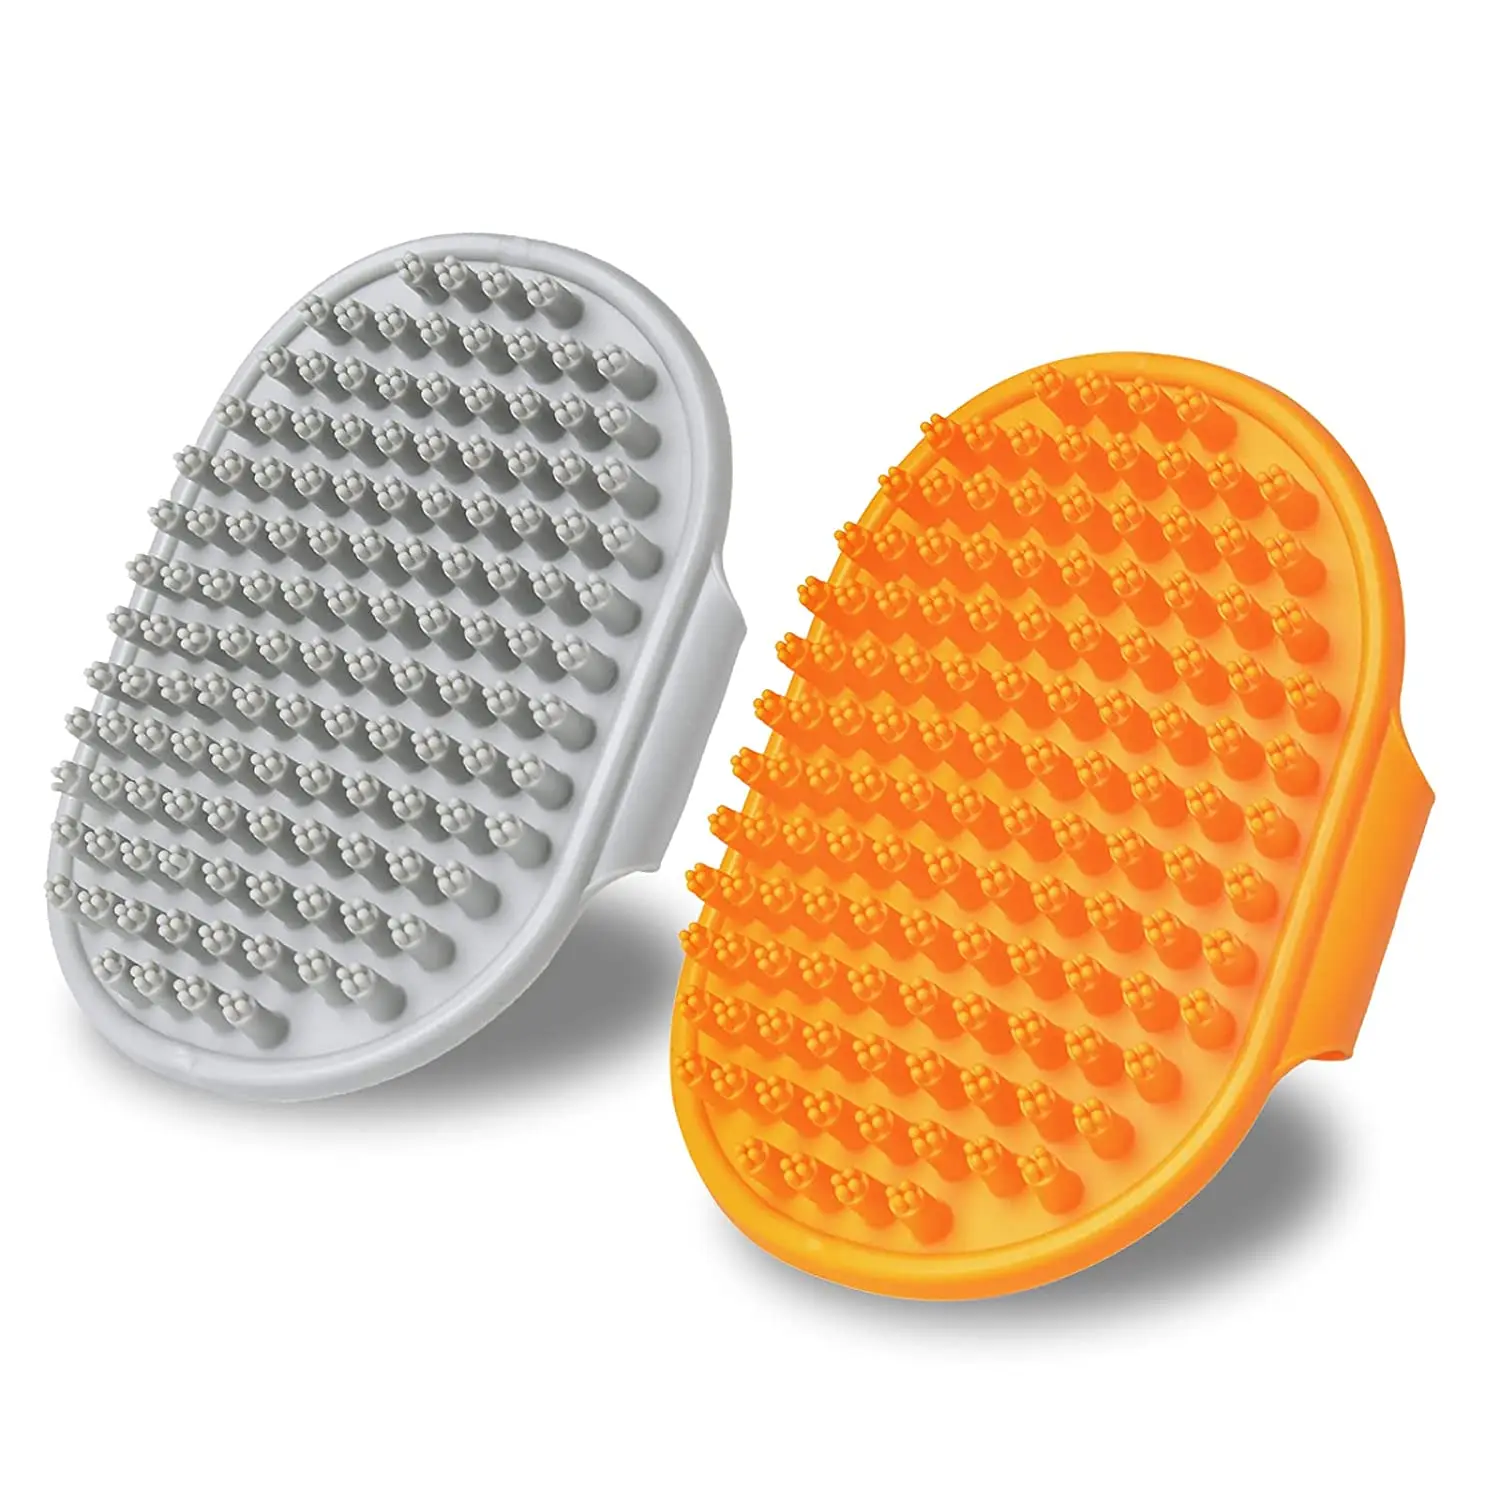 2 Pcs Dog Brush for Shedding Short Haired Dogs, Dog Grooming Shedding Bath Brush Soothing Massage  Comb for Dogs & Cats bathroom puppy dog cat bath massage gloves brush safety silicone pet accessories for dogs cats dog comb tools